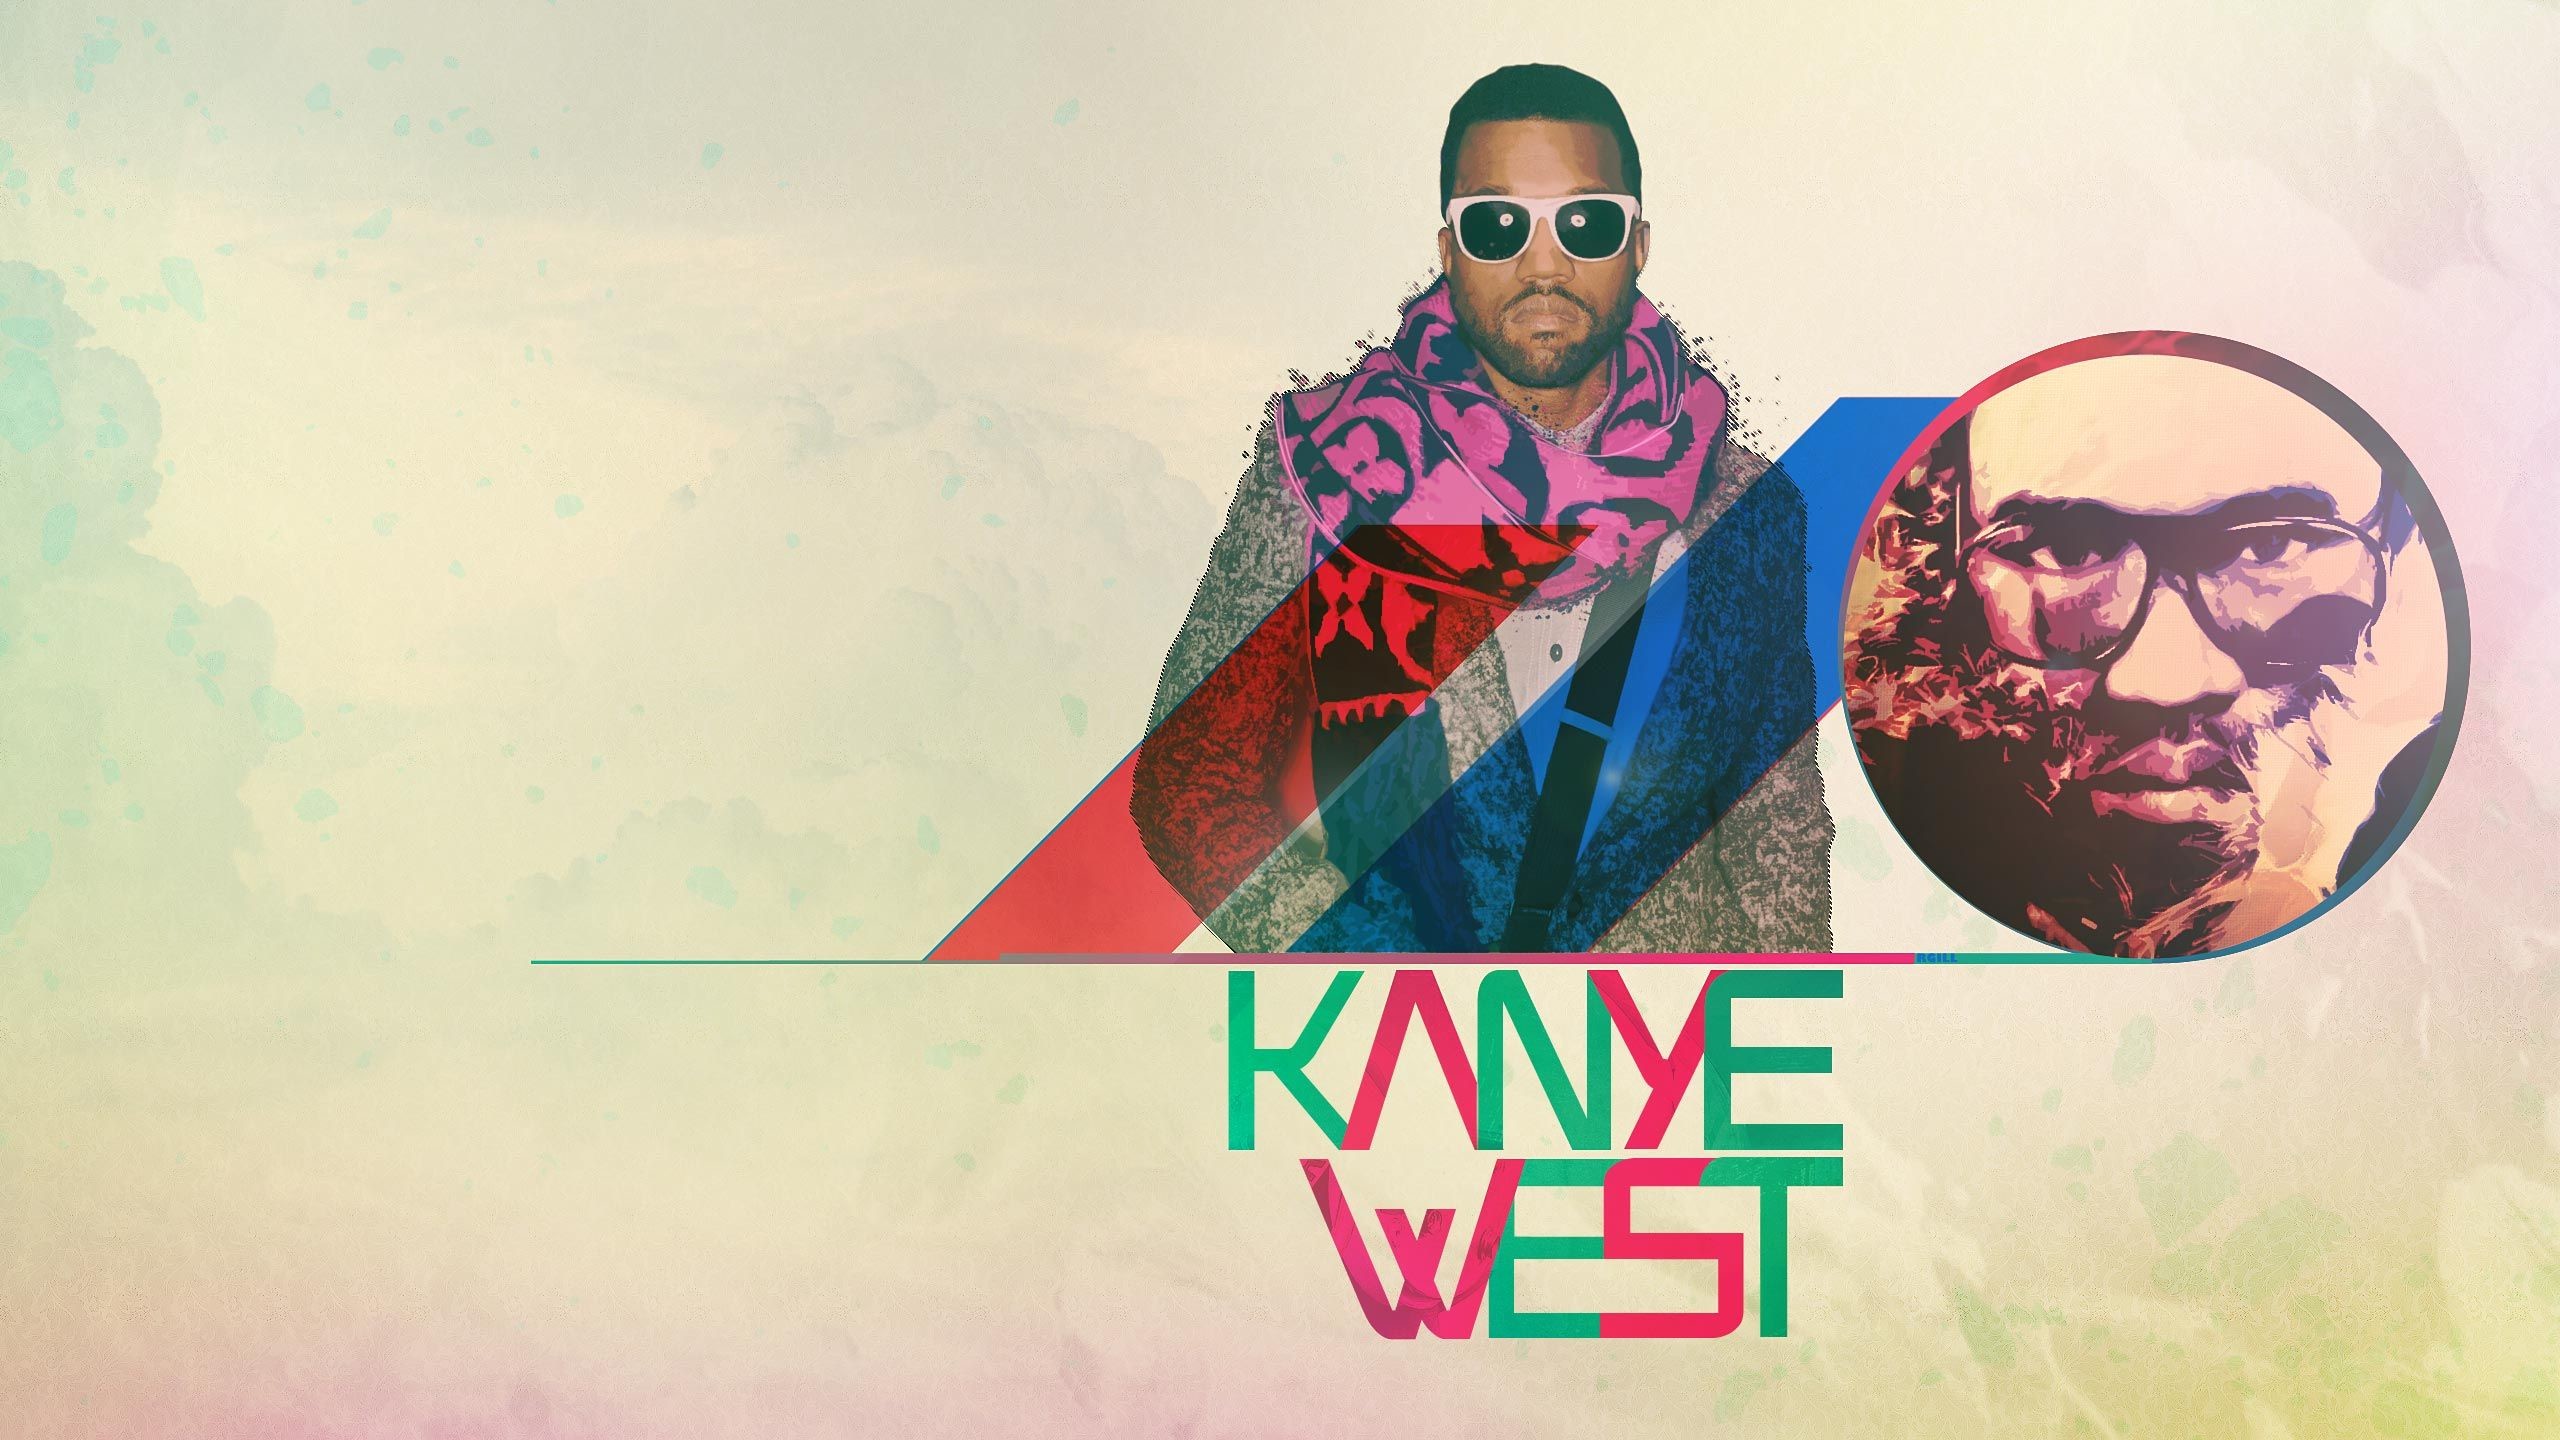 2560x1440 kanye west iphone wallpaper - photo #7. I Refuse to Believe This Rumor  About the iPhone With No